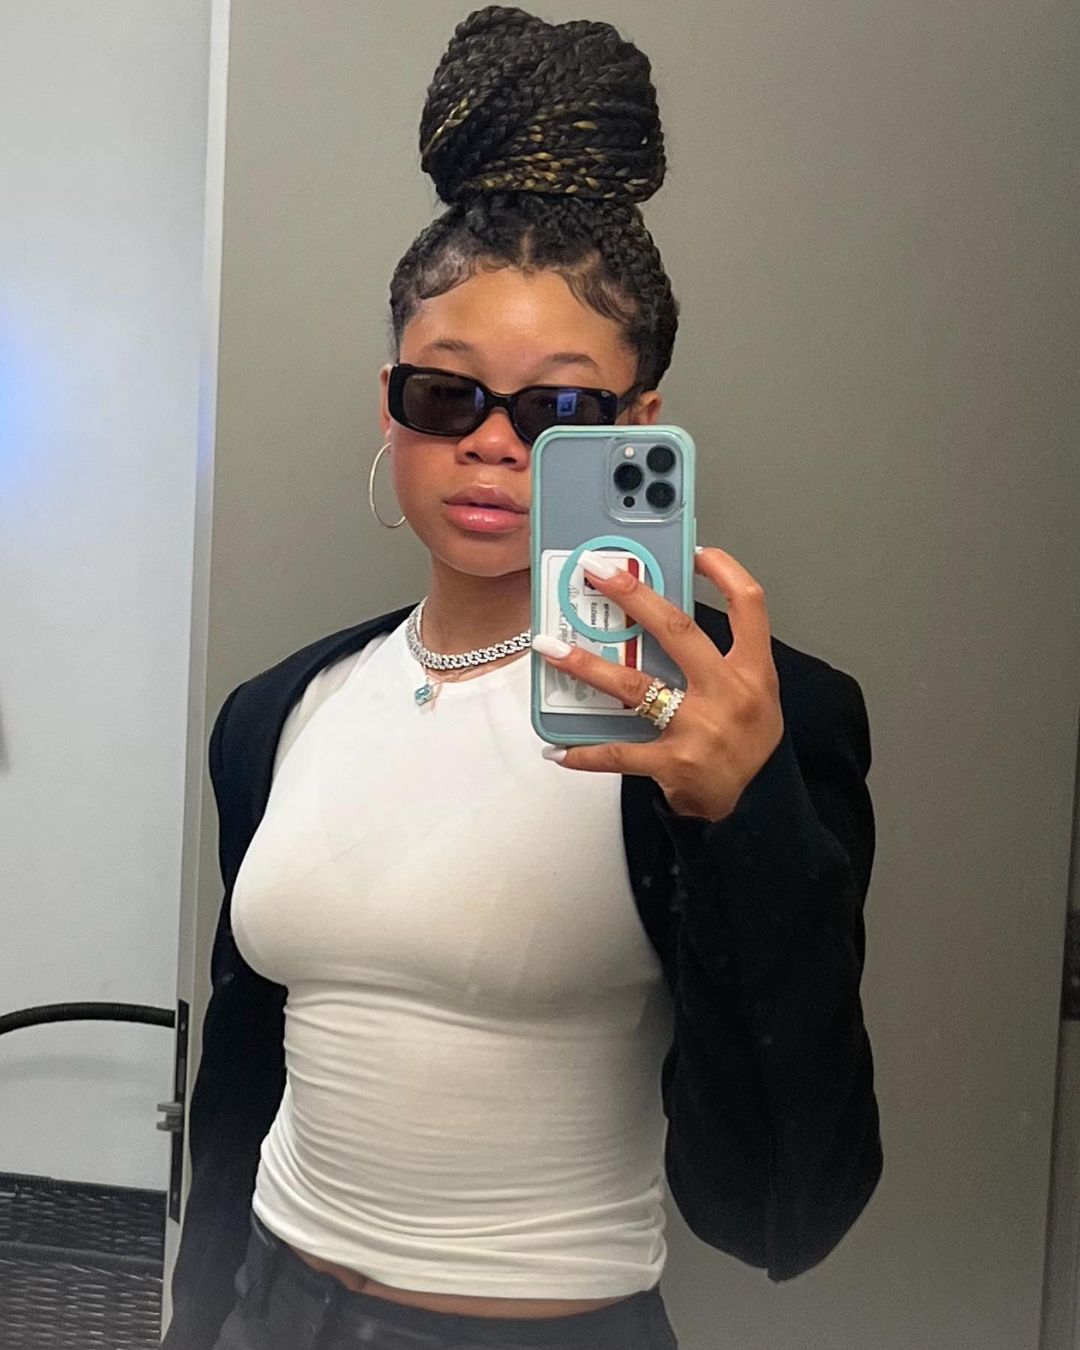 Storm Reid Phone Number and House Address Details